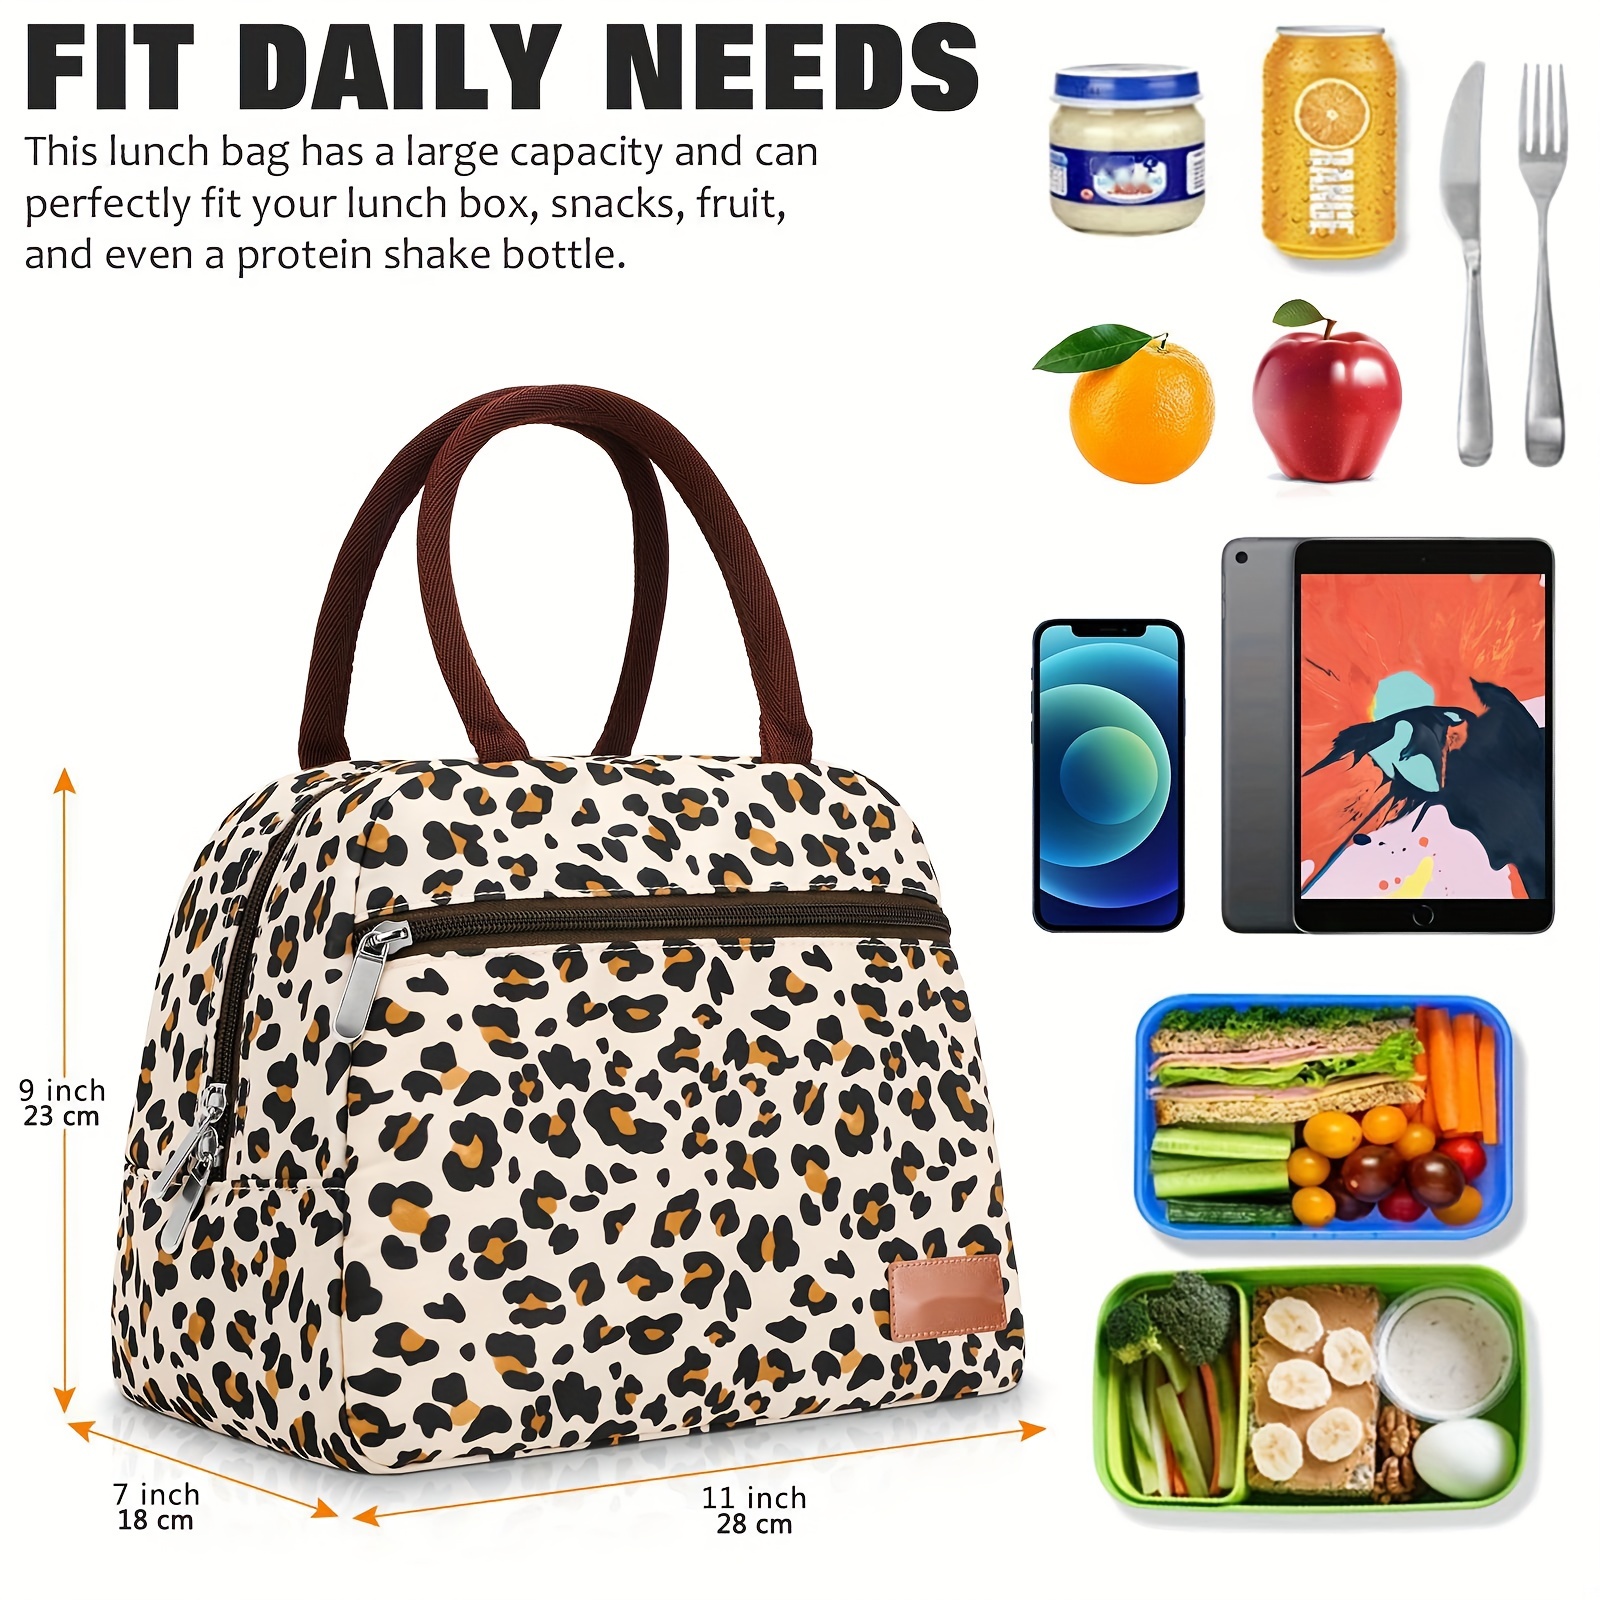 5 Stylish Lunch Bags